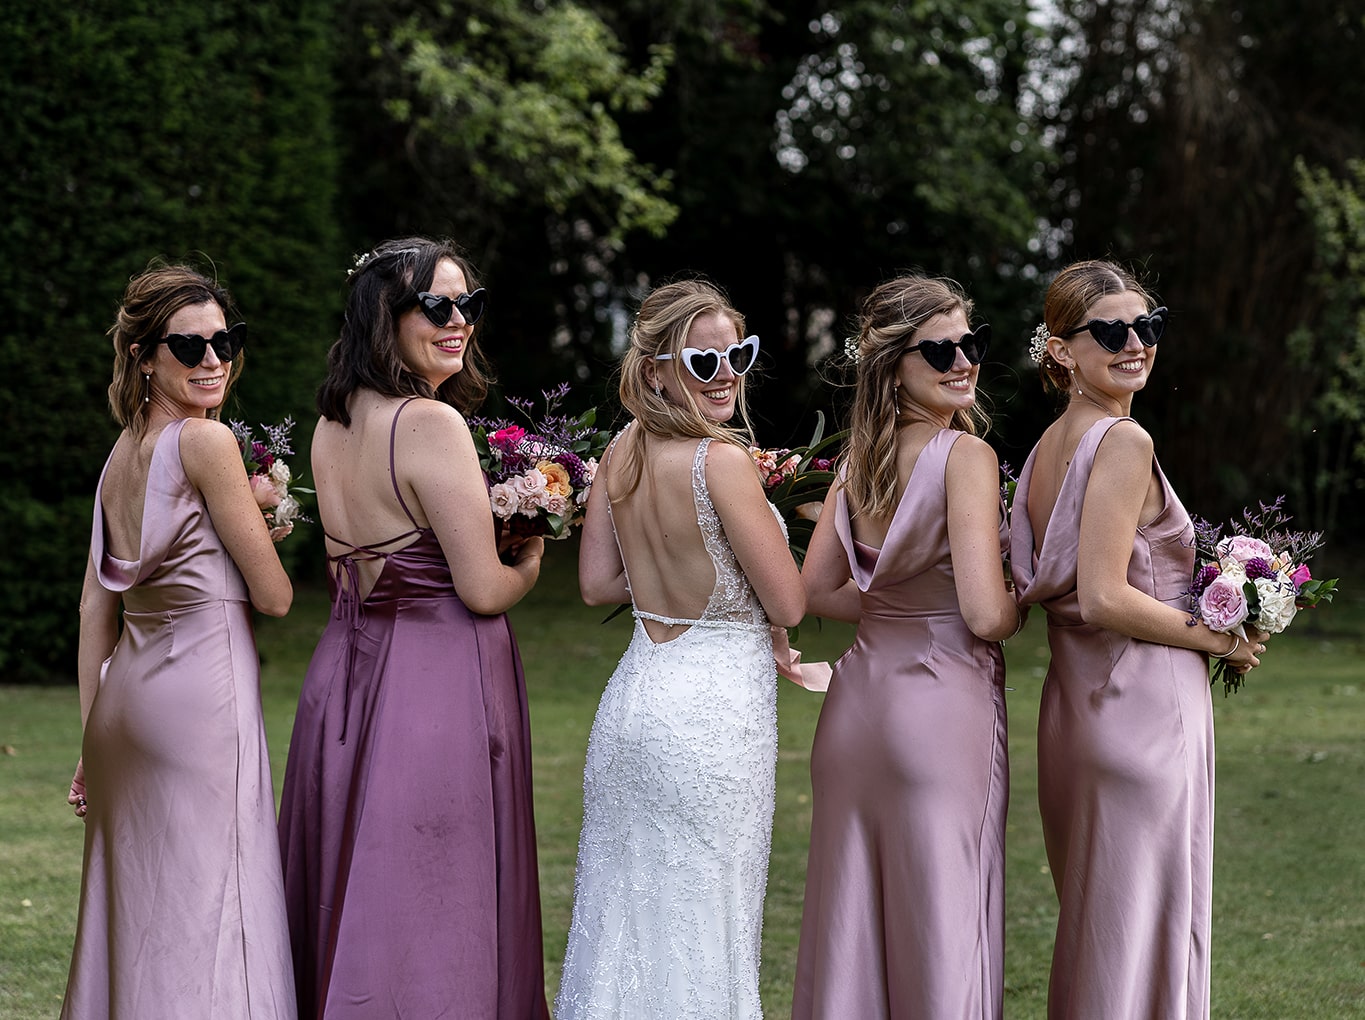 Happy bride and her bridesmaids wearing humorous heart-shaped sunglasses